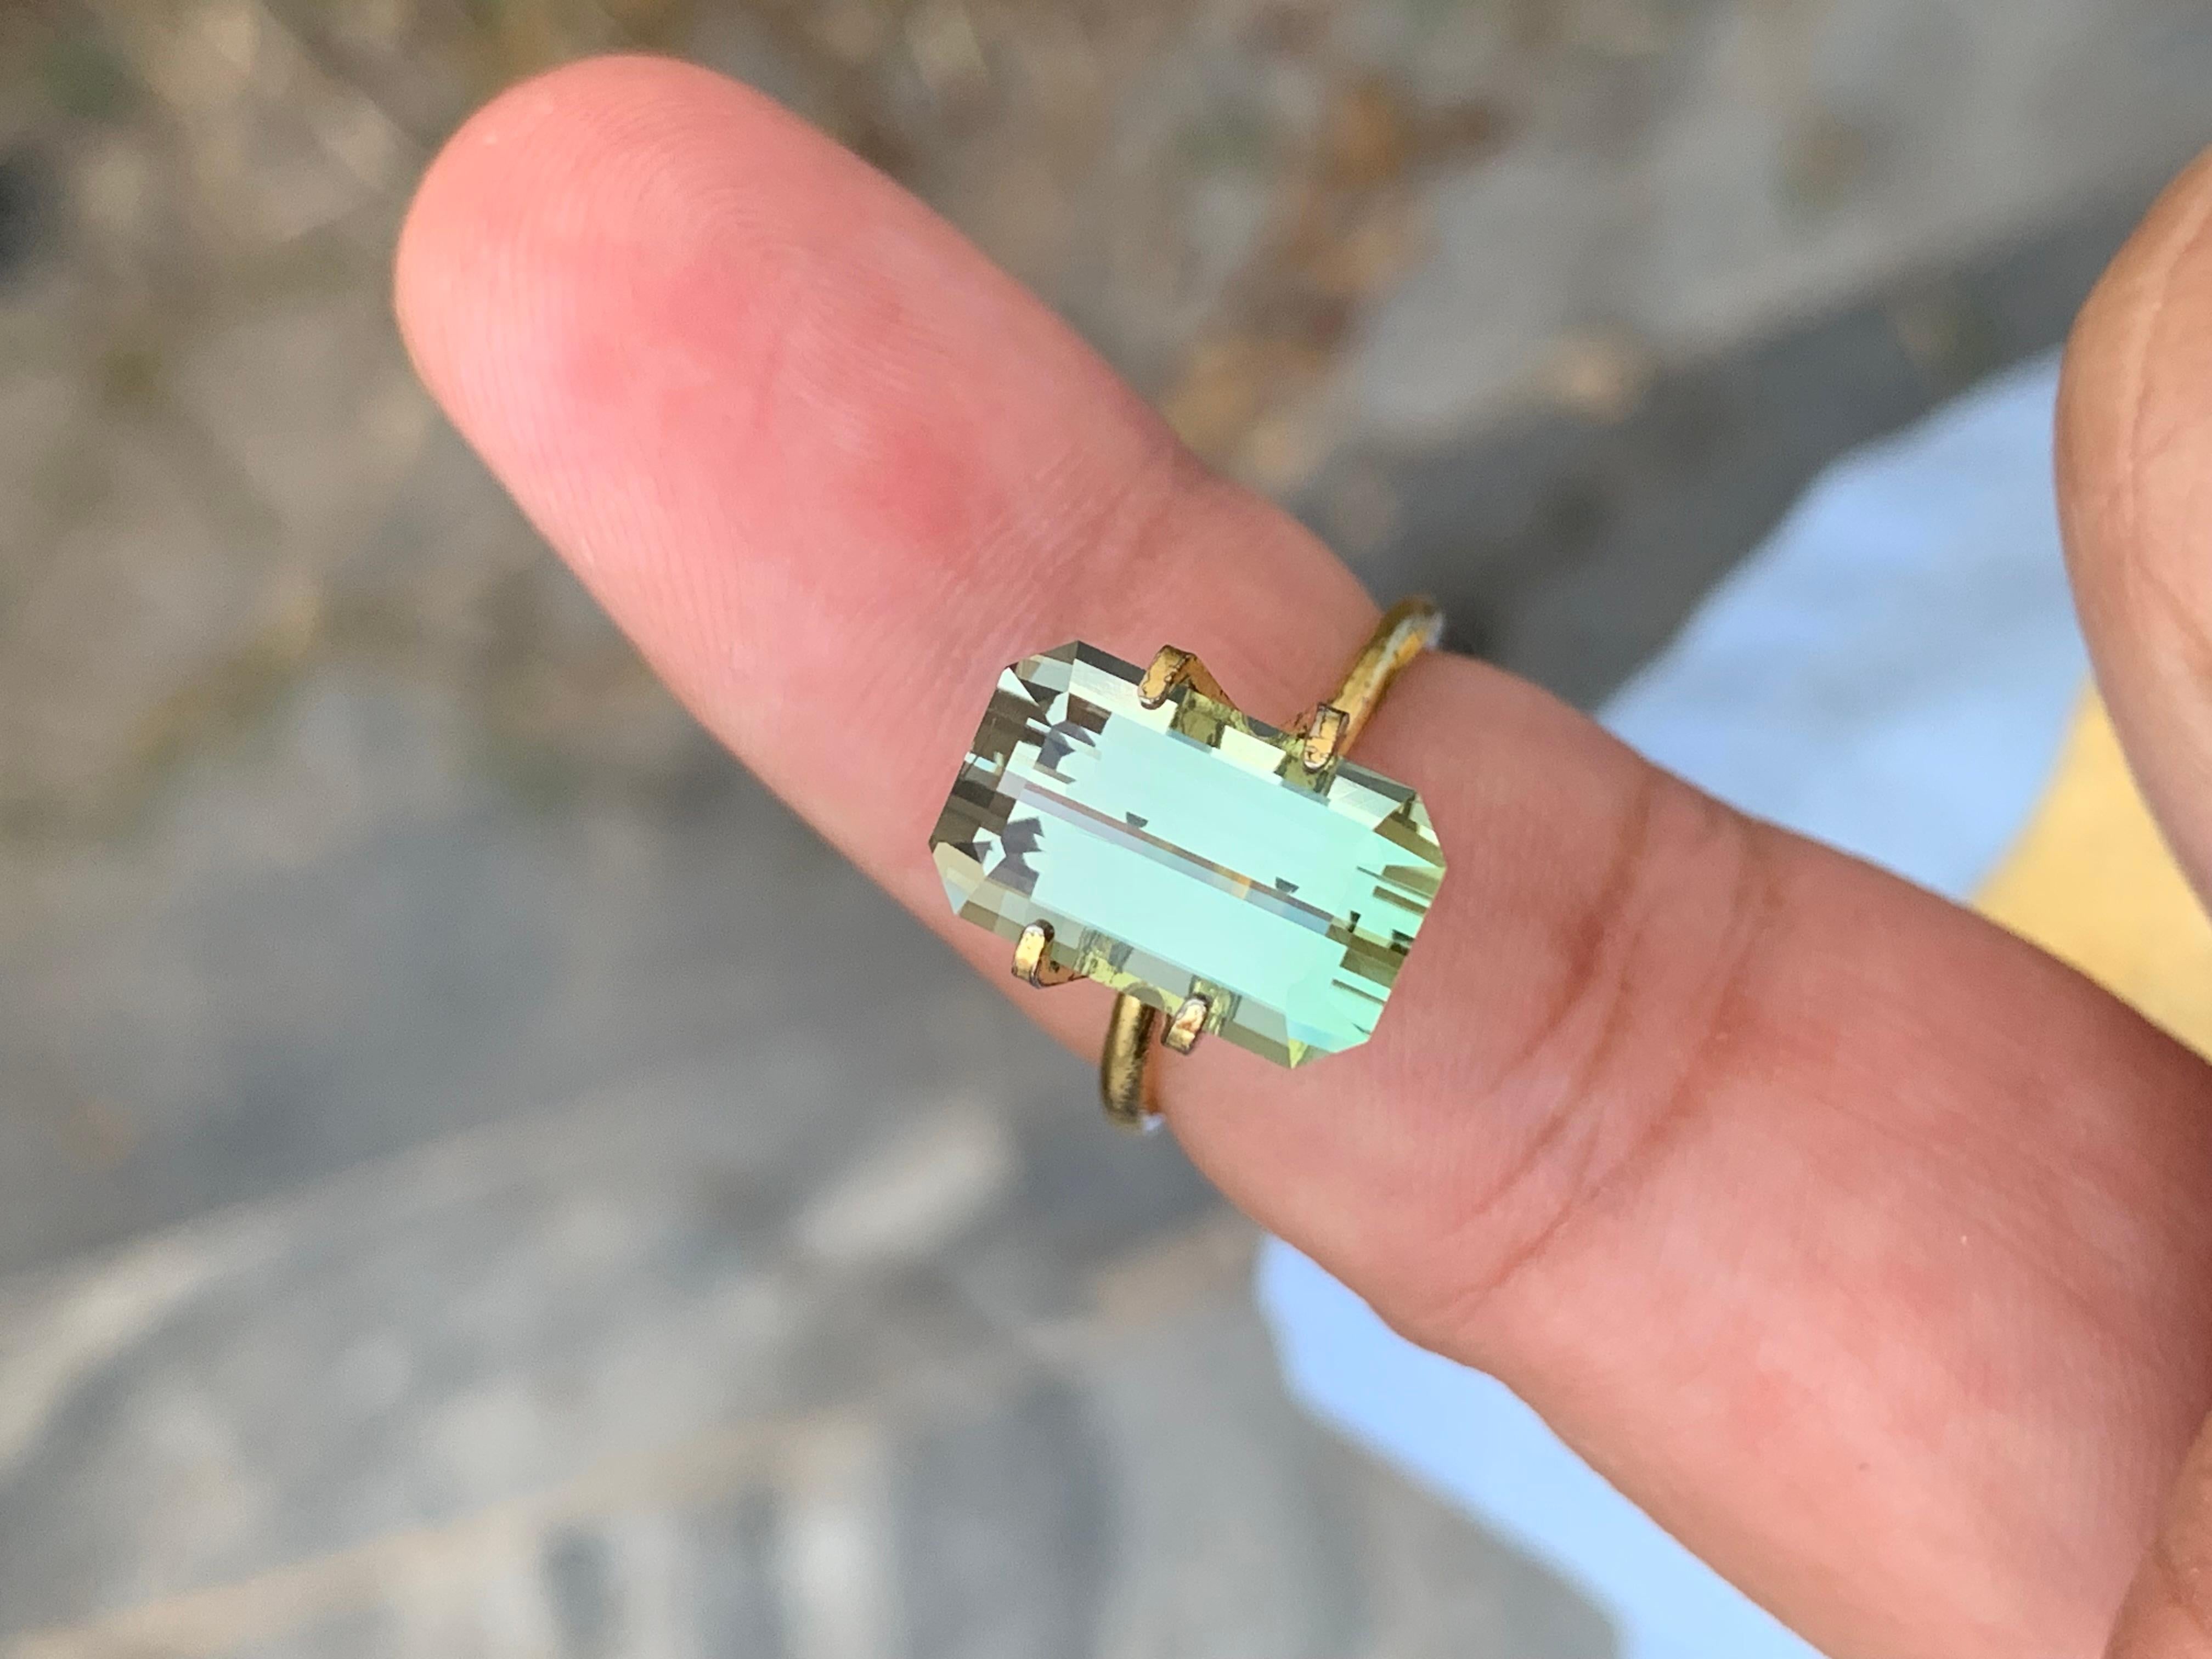 Loose Tourmaline 
Weight: 6.10 Carats 
Dimension: 13.1x8.2x6.4 Mm
Origin: Afghanistan 
Shape: Emerald 
Color: Light Green
Treatment: Non
Certificate: On Customer Demand
Tourmaline is a fascinating and versatile gemstone renowned for its vibrant